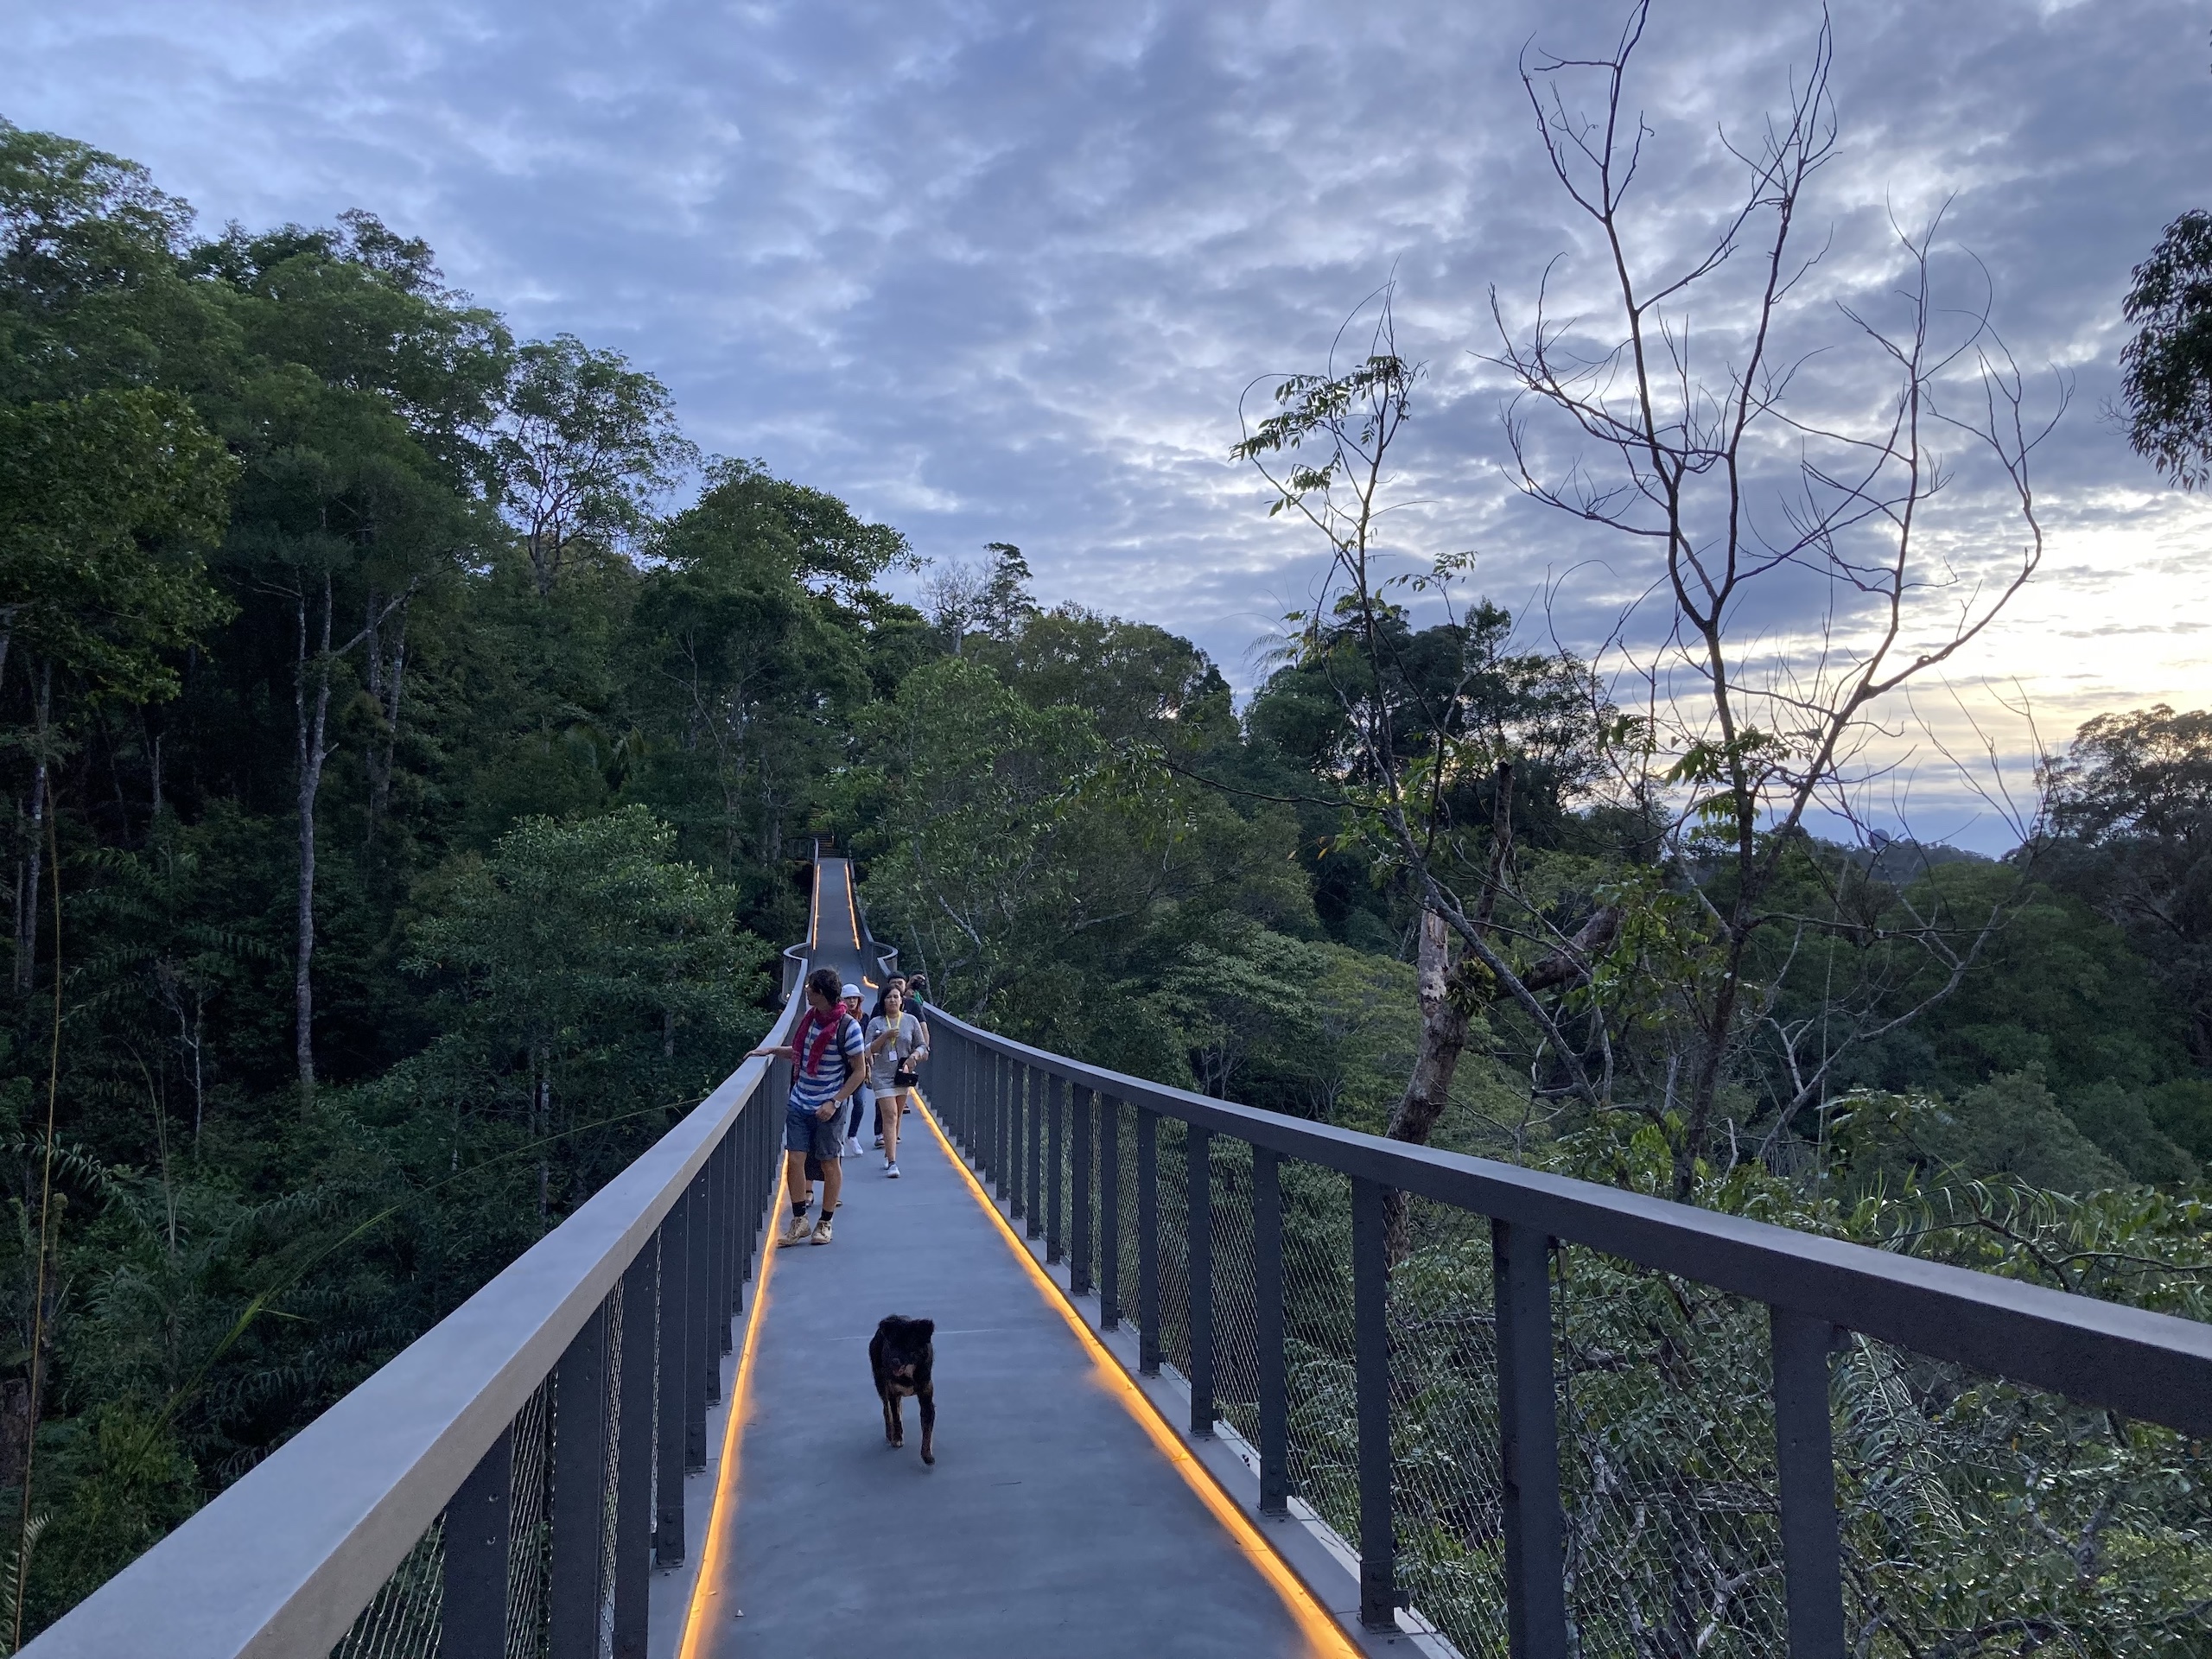 People and a dog walk along a canopy walkway in Penang, Malaysia